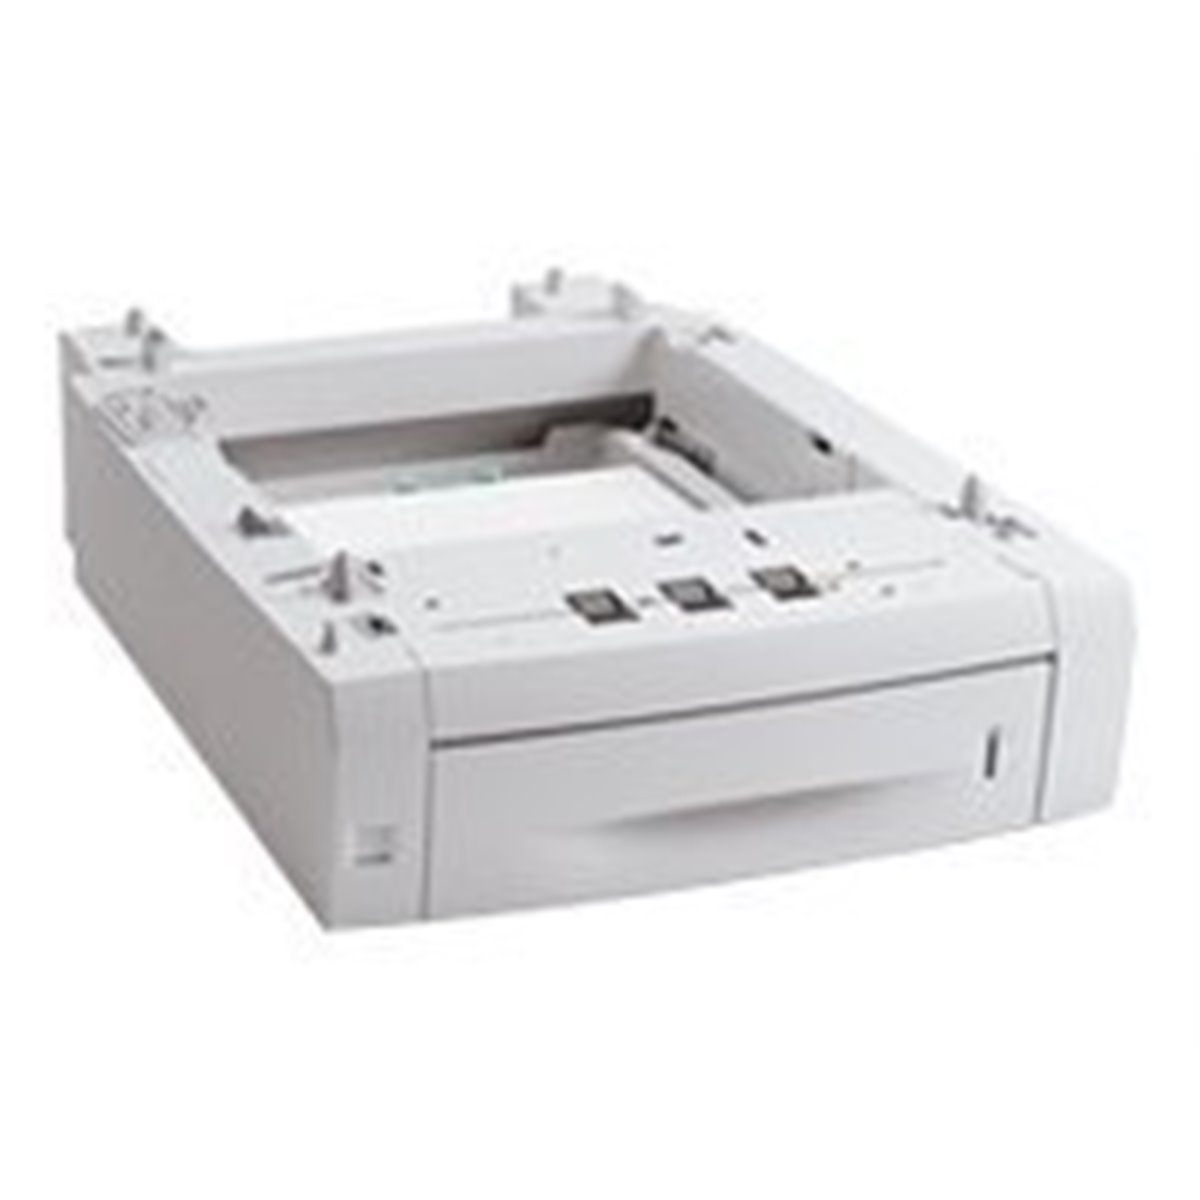 Xerox Additional Hi-Capacity Paper Tray and feeder - 525 sheets - 8.16 kg - 546 x 692 x 253 mm